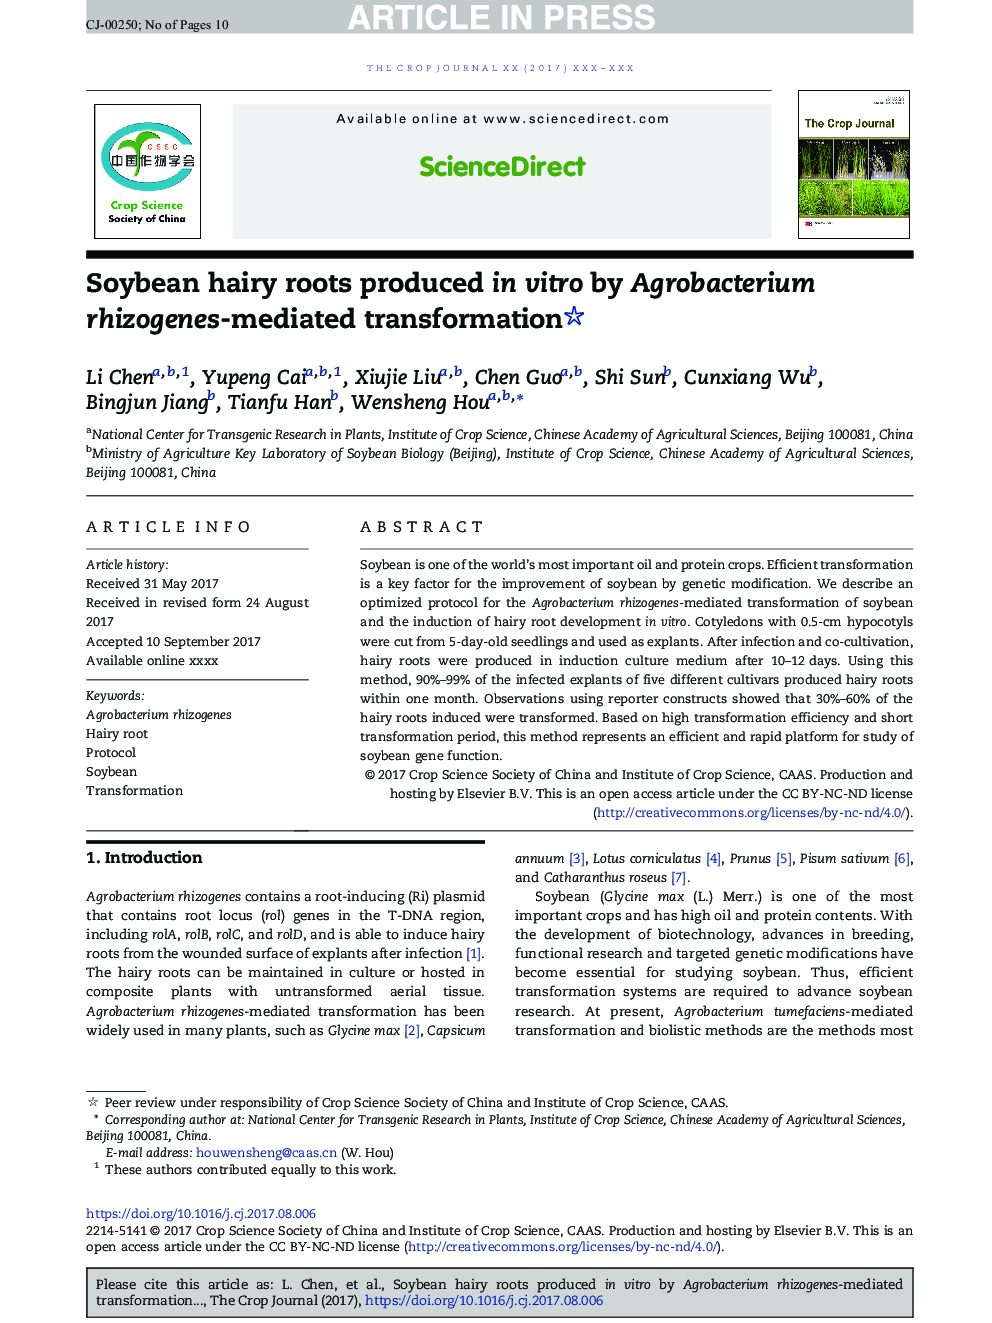 Soybean hairy roots produced in vitro by Agrobacterium rhizogenes-mediated transformation